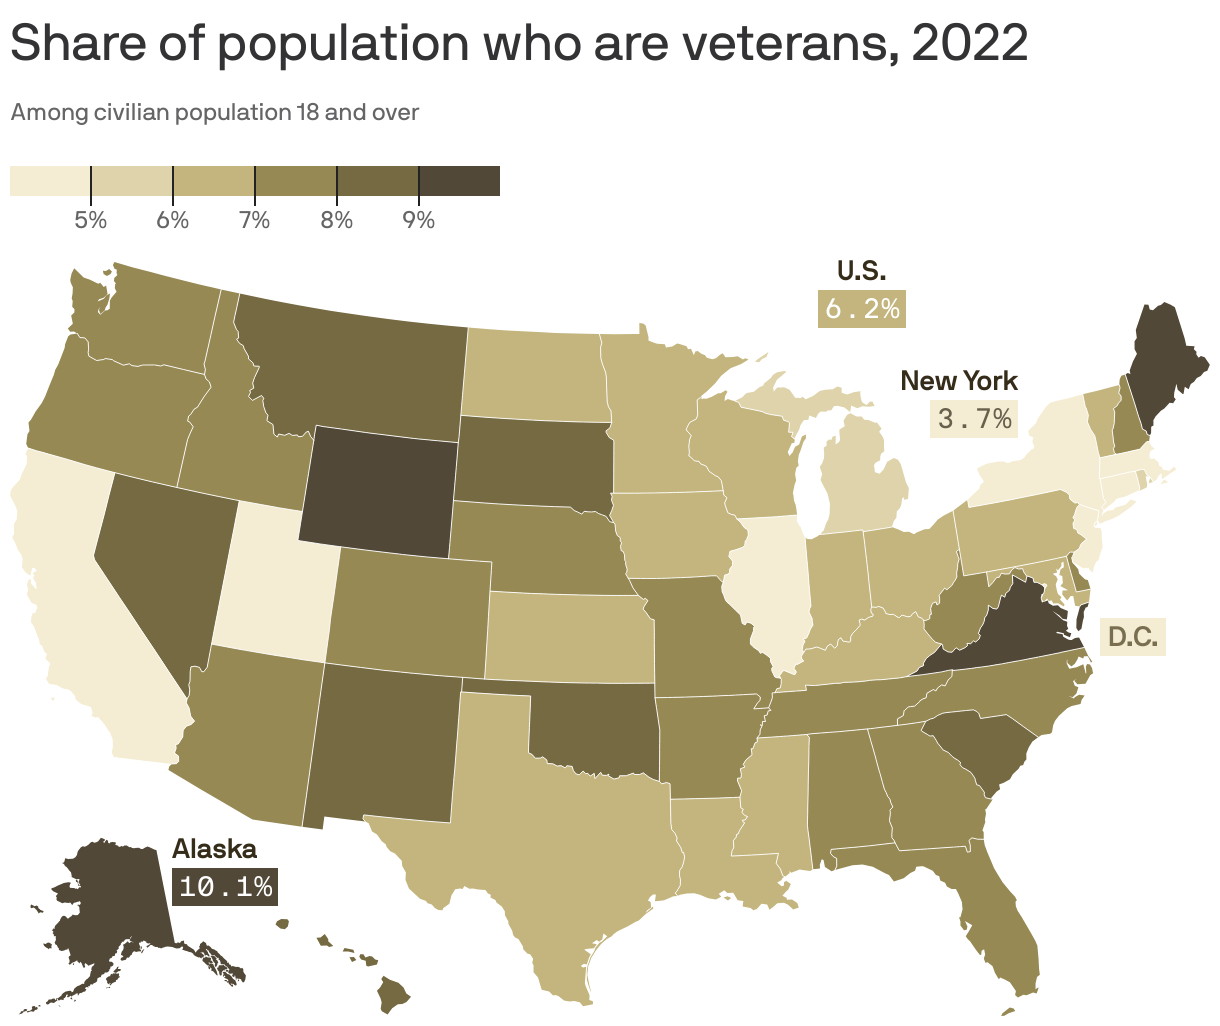 Share of population who are veterans, 2022